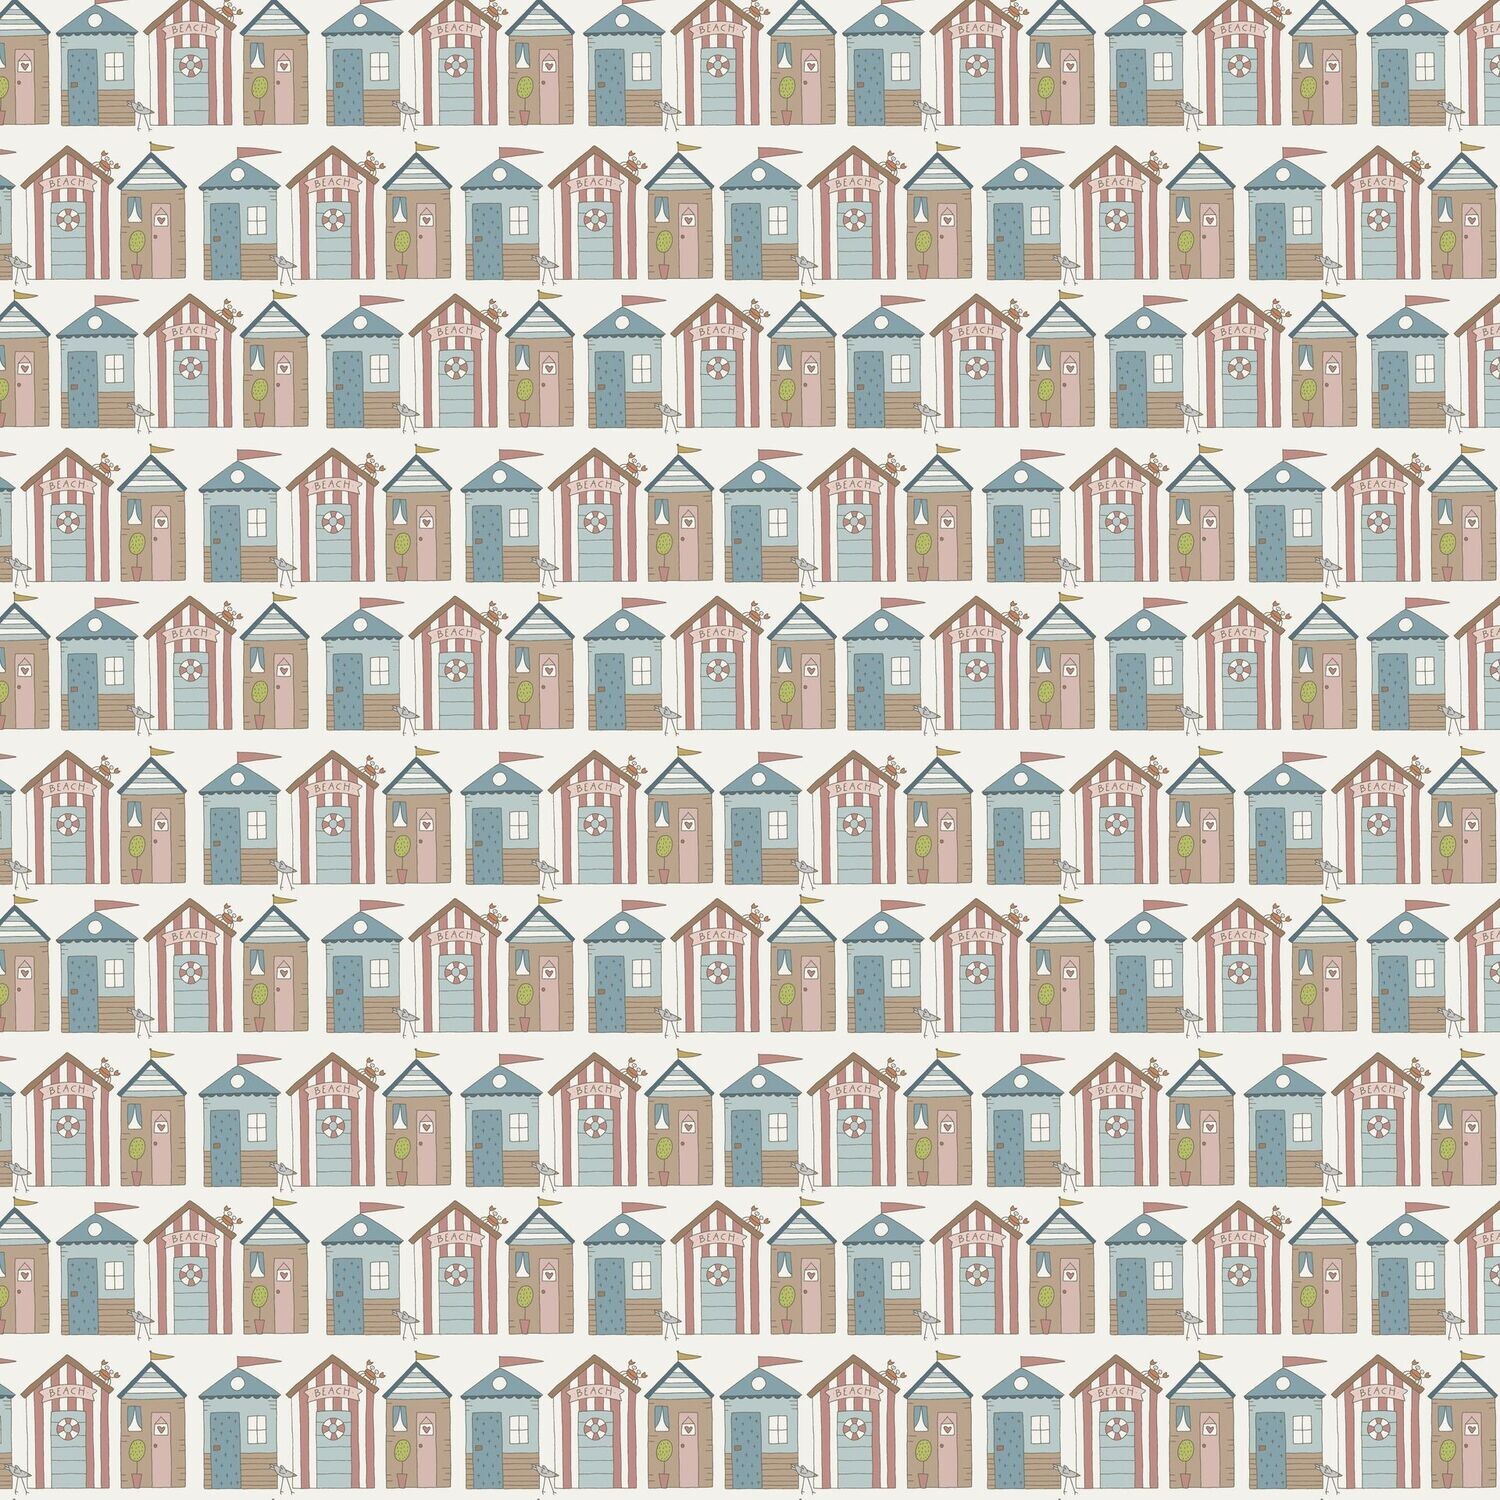 Sunkissed Sojourn - Beach Huts